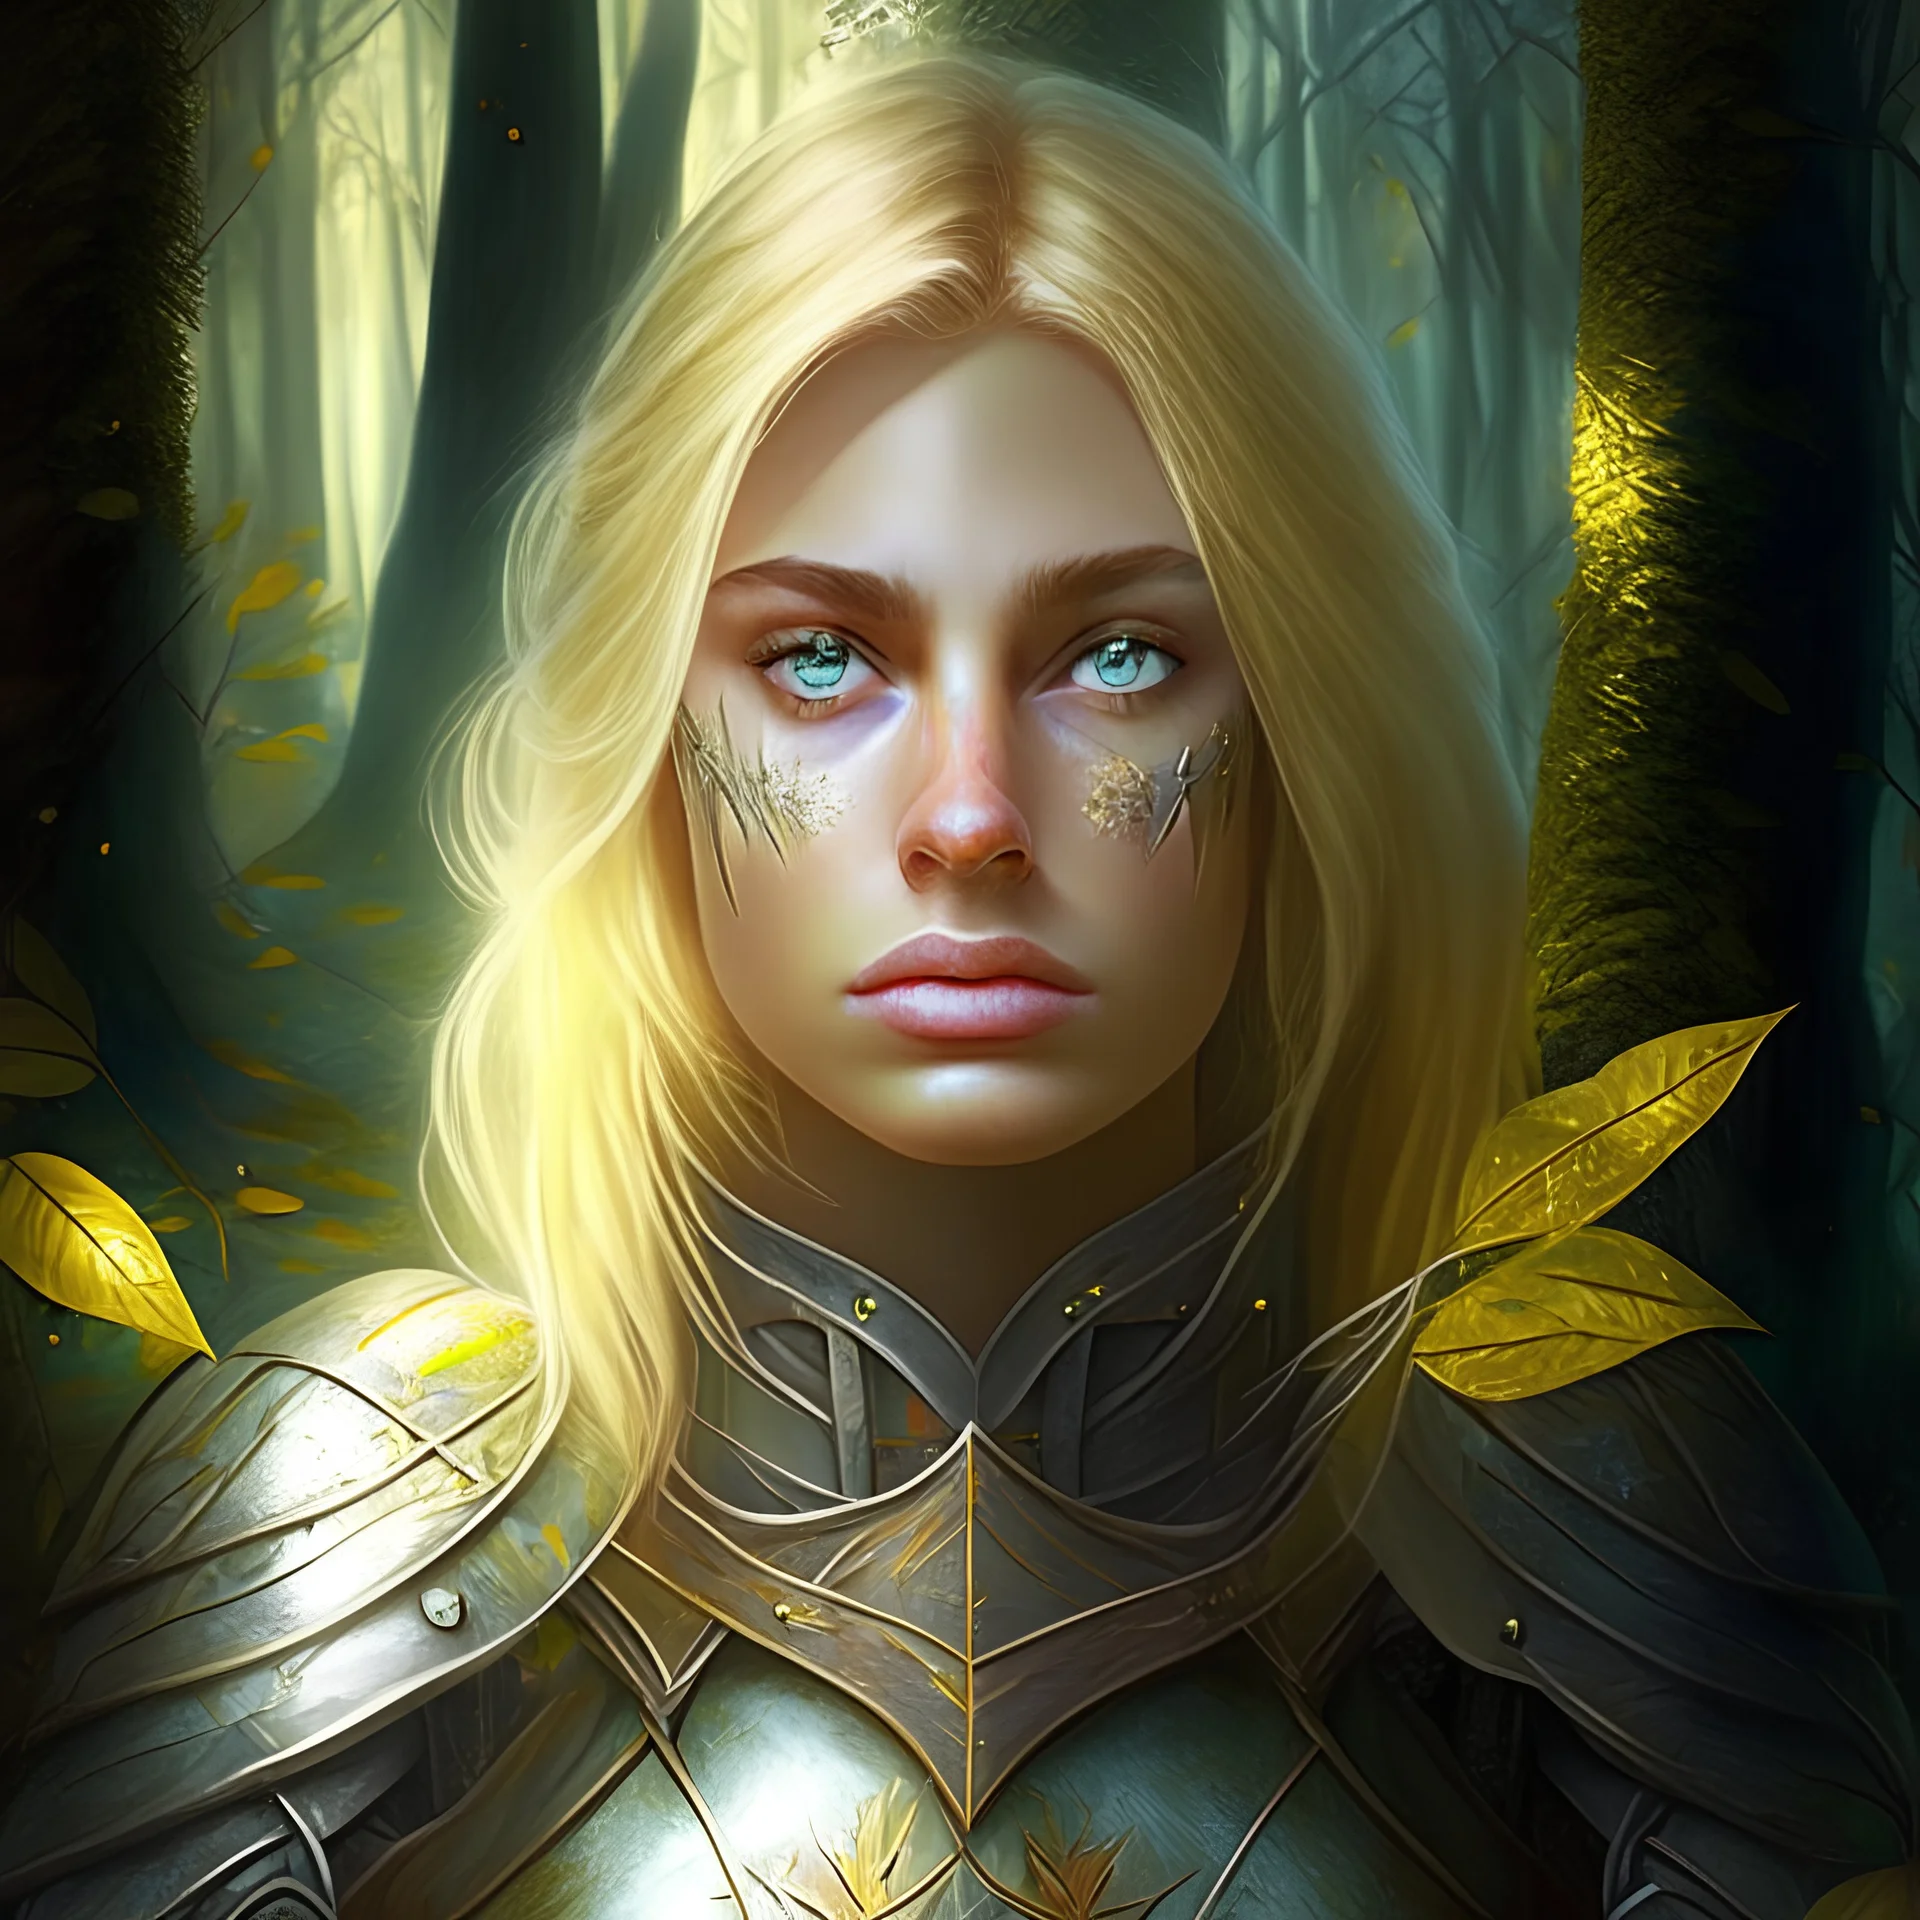 A blond knight woman mysterious, beautiful, with slightly hazel eyes, and possesses the element of forest